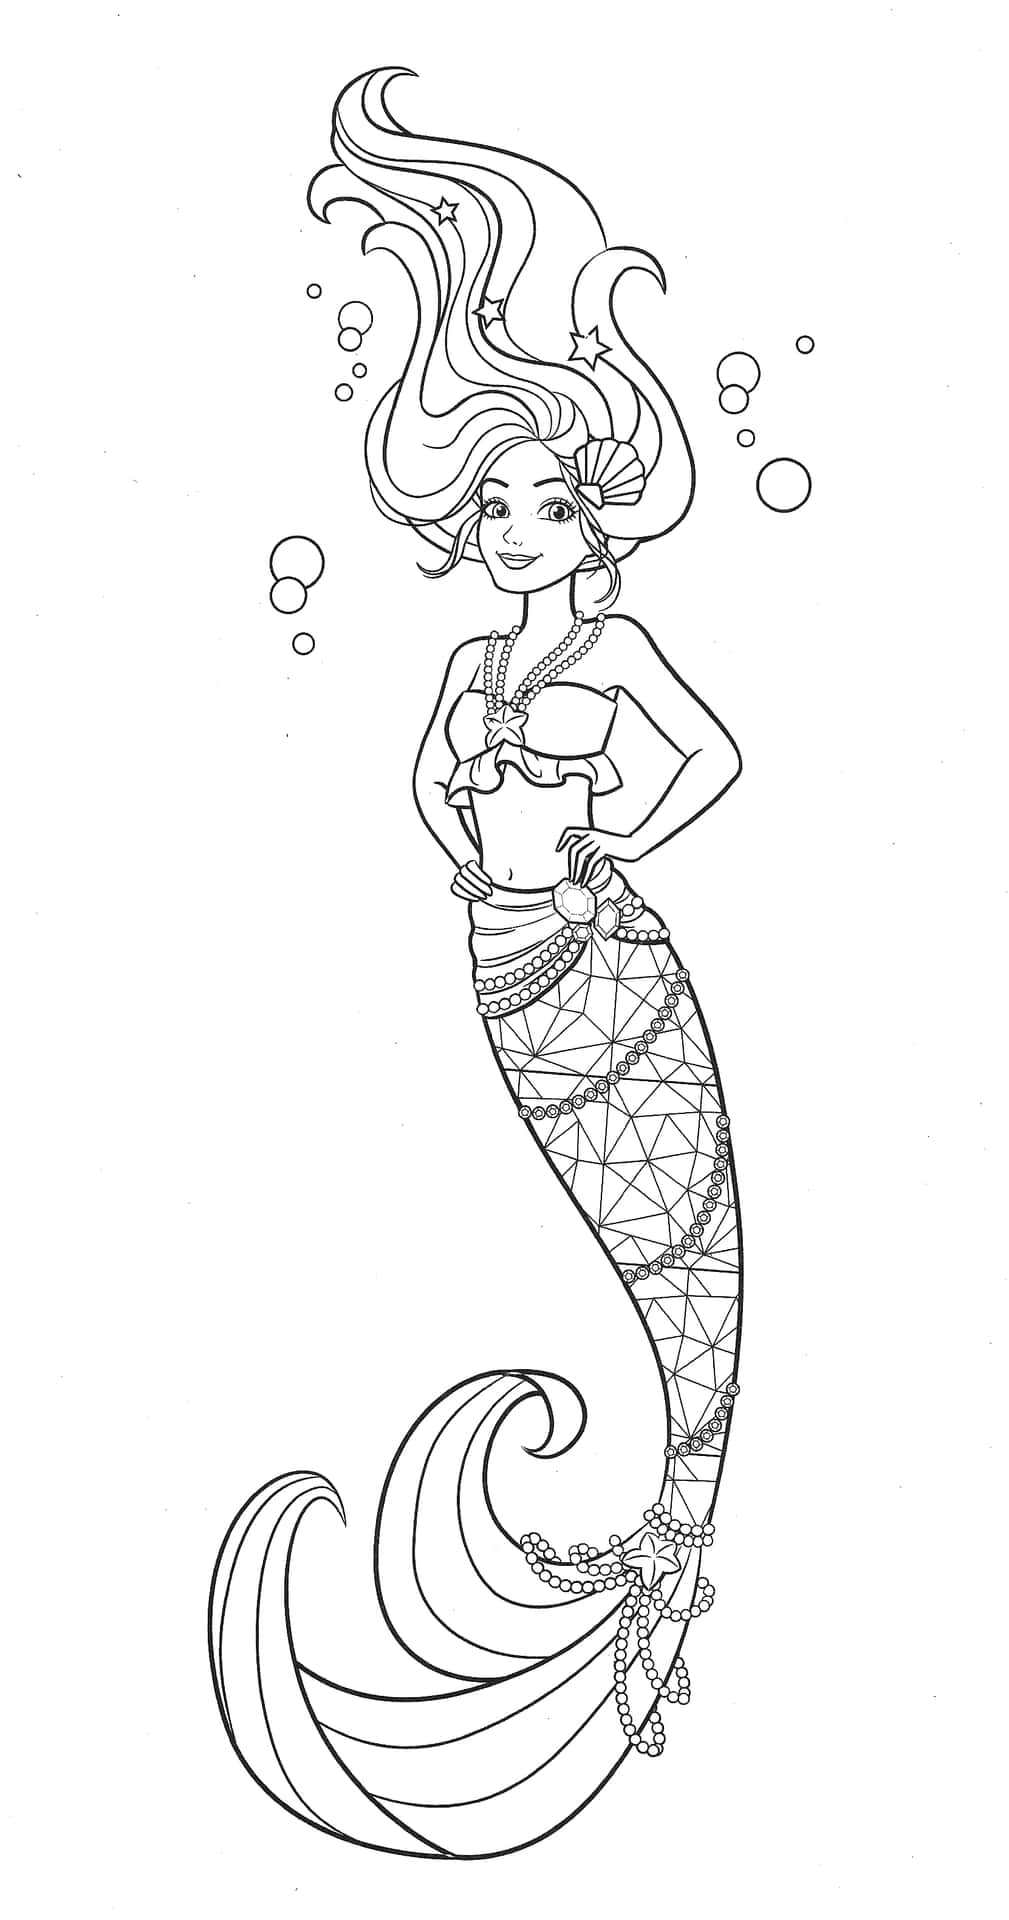 Color your own Adventures with these Mermaid Coloring Pages